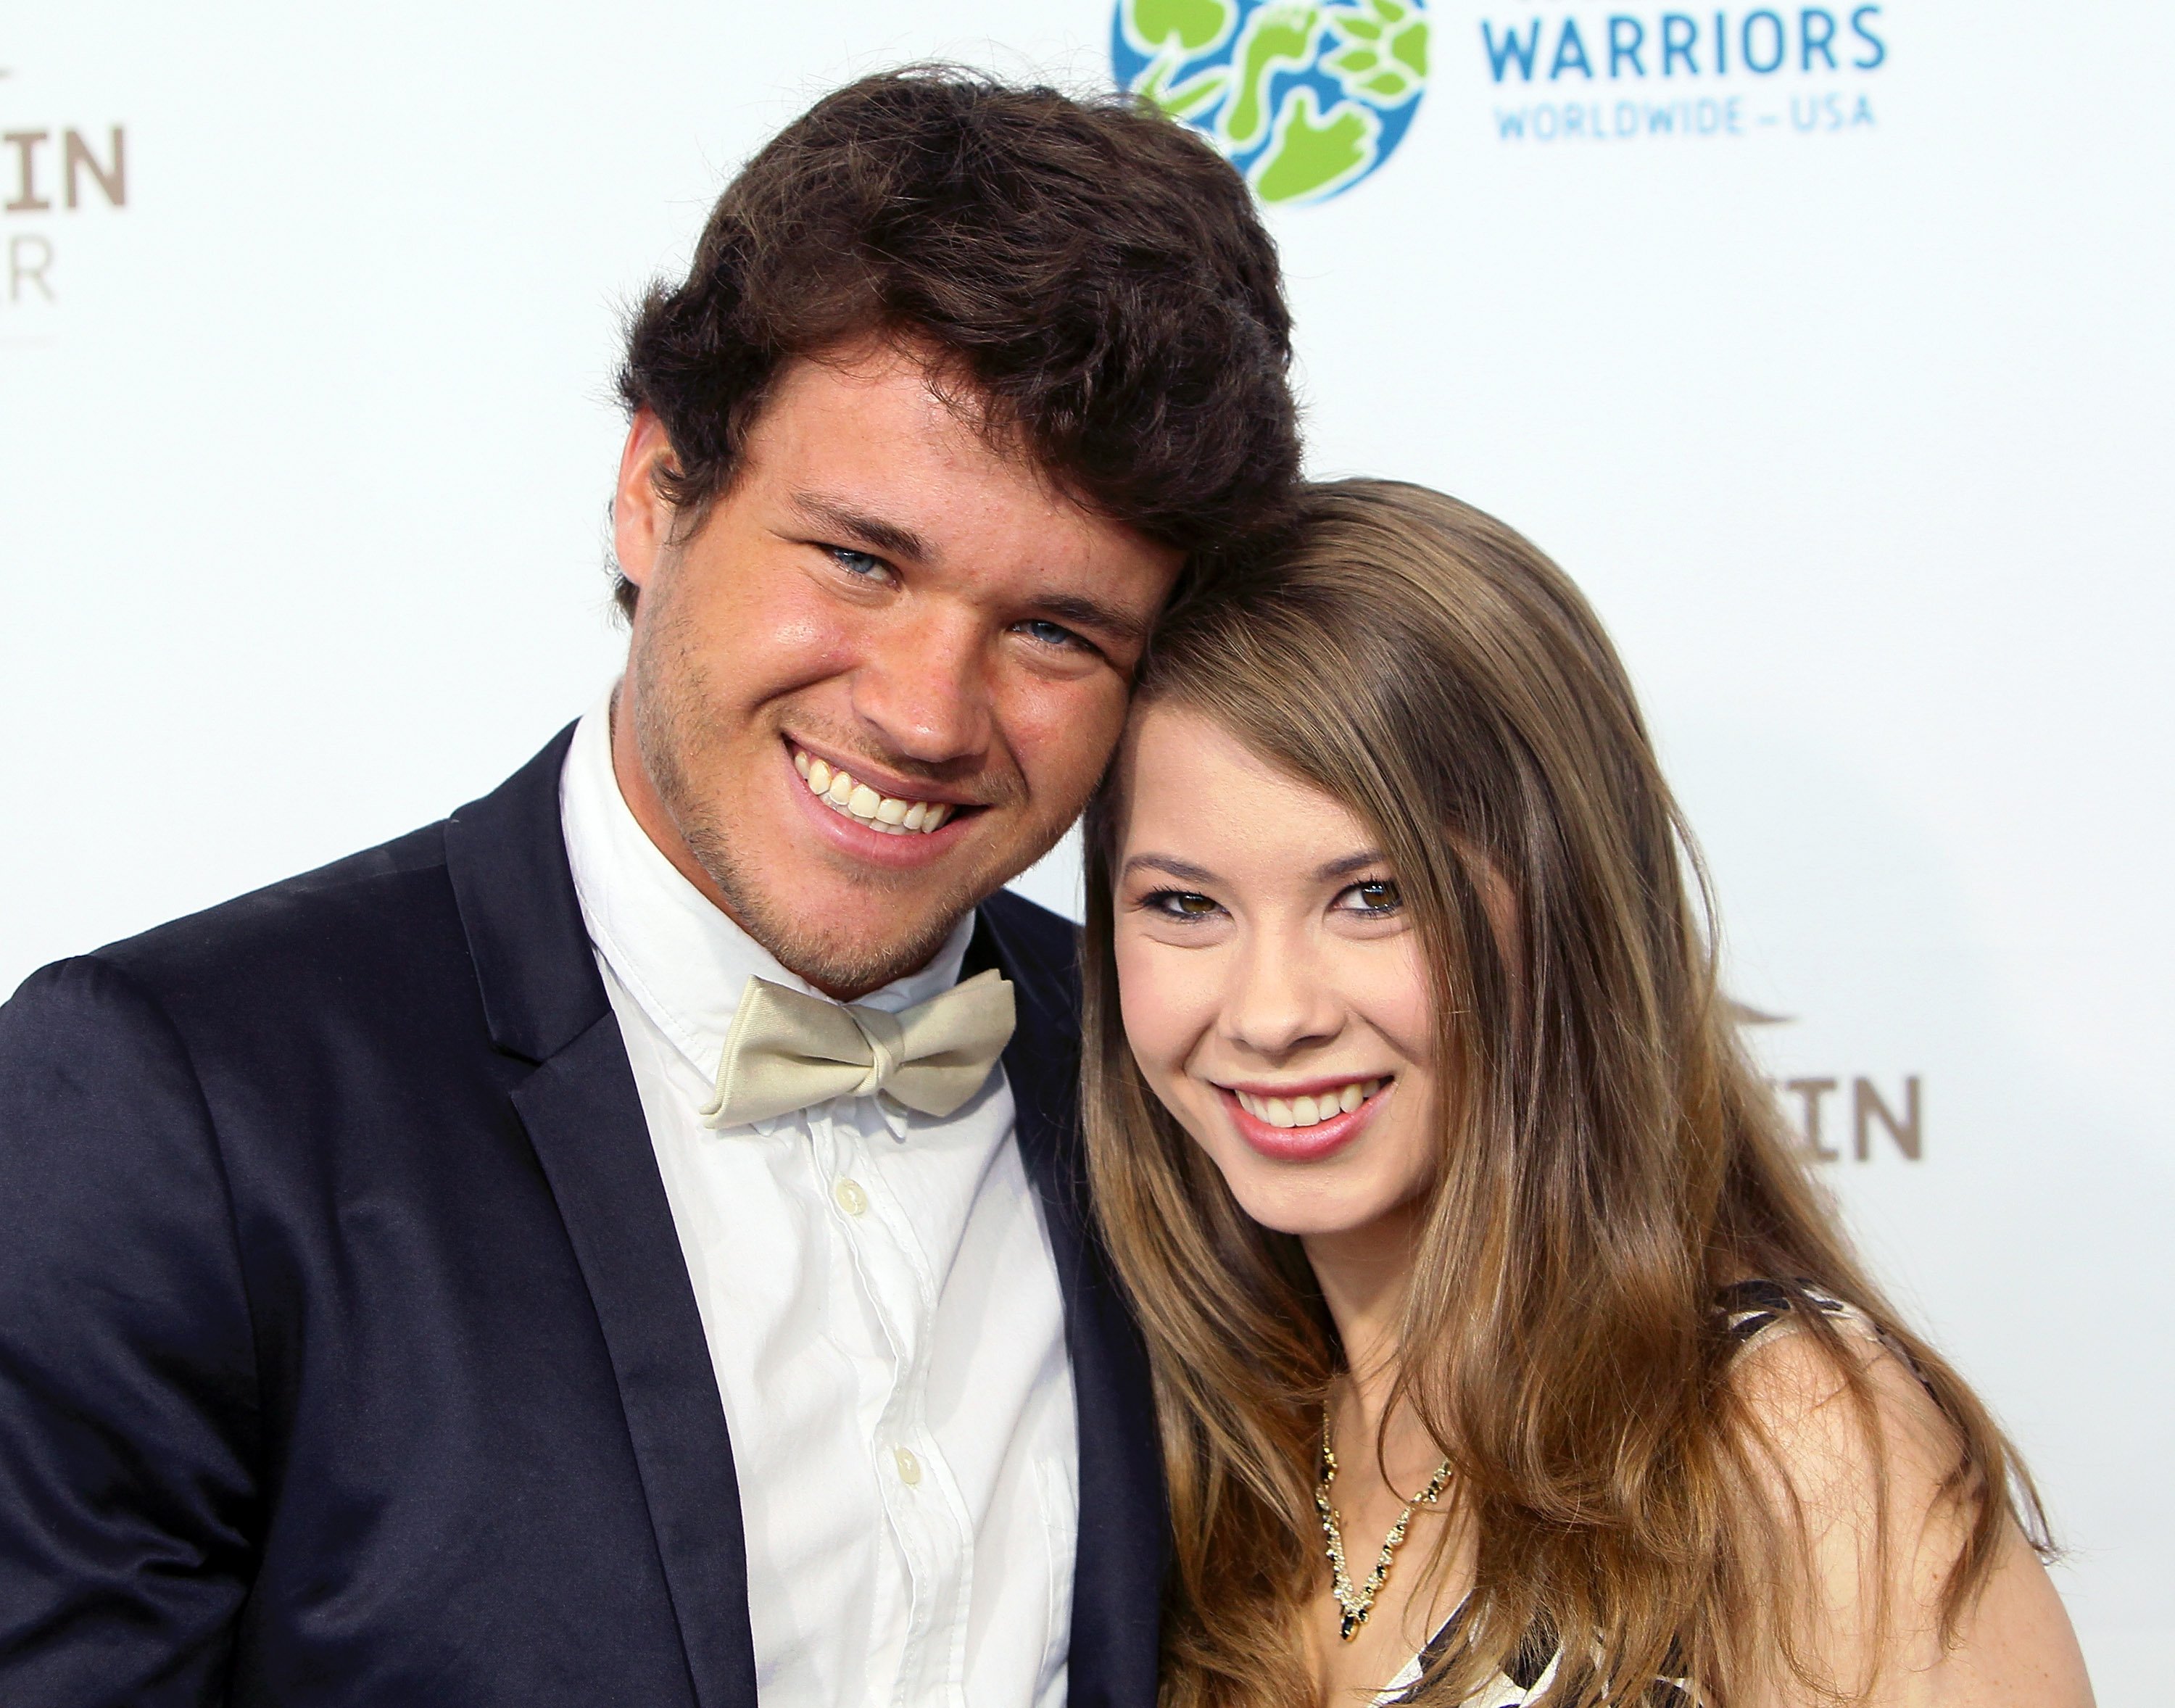 Chandler Powell and Bindi Irwin attend the Steve Irwin Gala Dinner  at L.A. LIVE on May 21, 2016, in Los Angeles, California. | Source: Getty Images